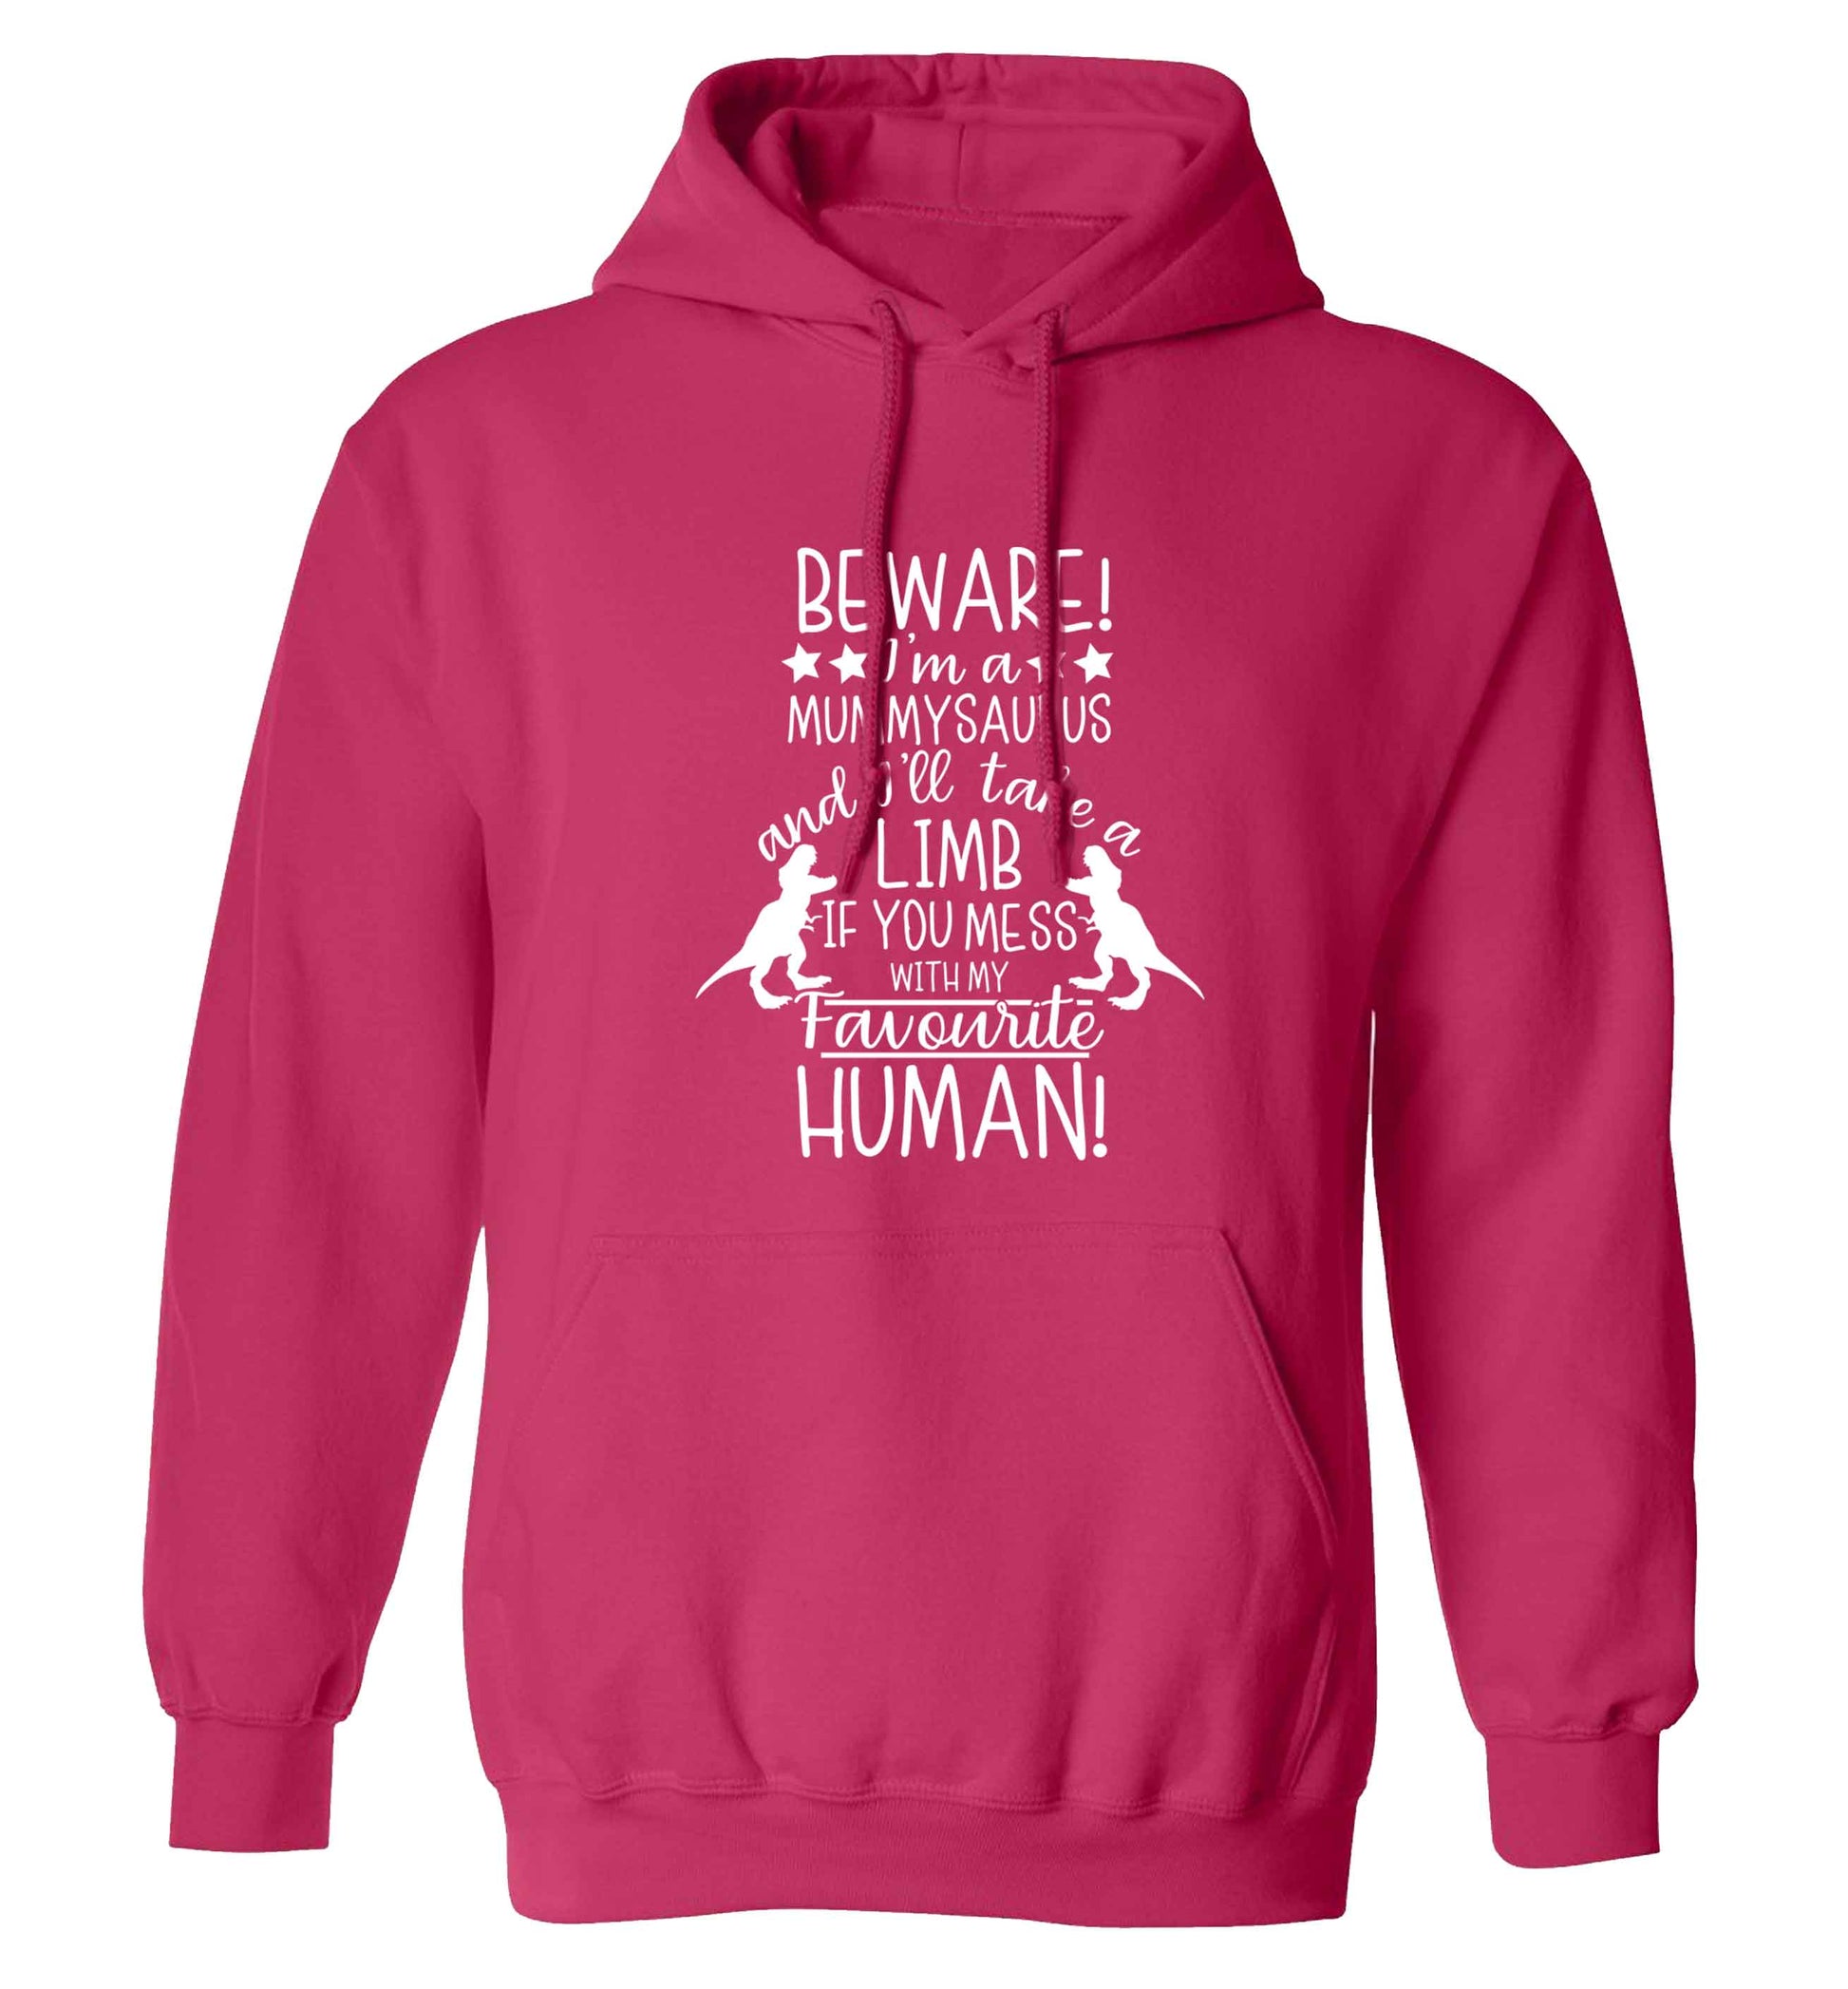 Perfect gift for any protective mummysaurus! Beware I'm a mummysaurus and I'll take a limb if you mess with my favourite human adults unisex pink hoodie 2XL